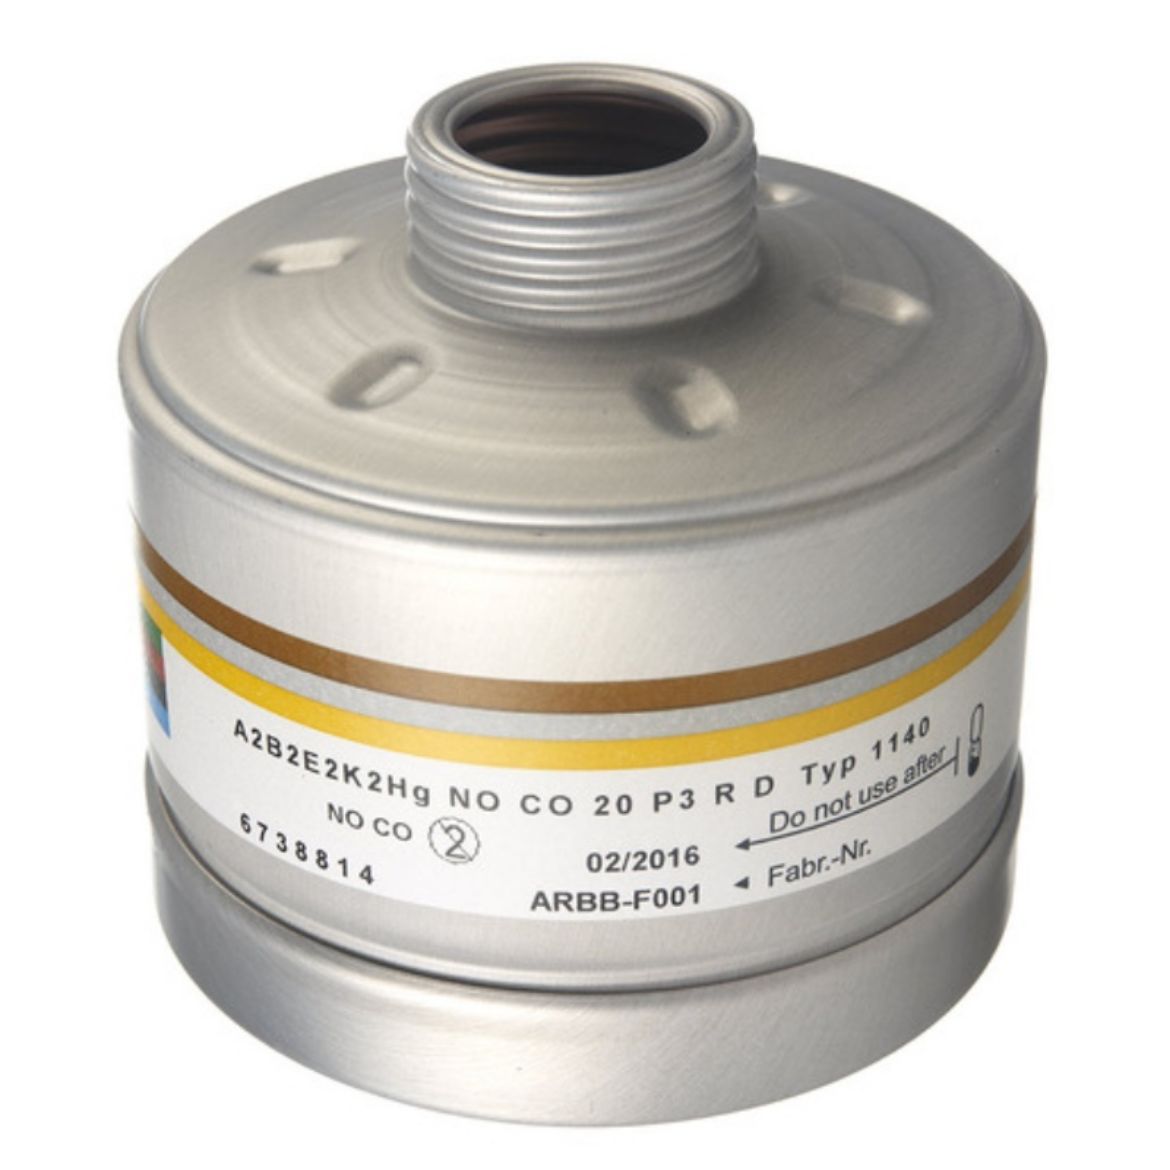 Picture of RD40 FILTER 1140 ABEK2 HGNO/CO P3 R D